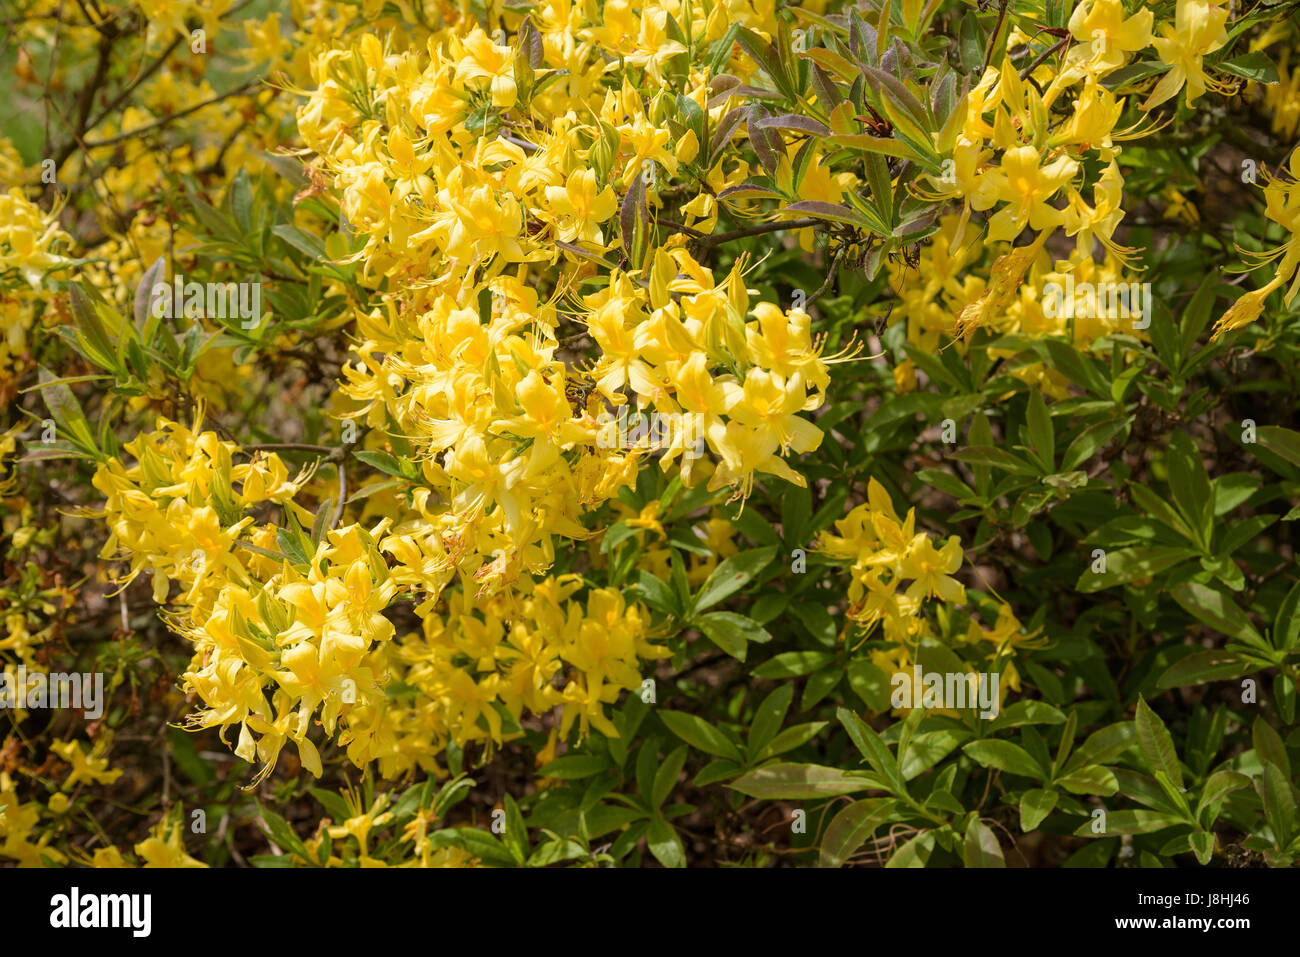 Yellow rhododendron flowers as natural floral background Stock Photo